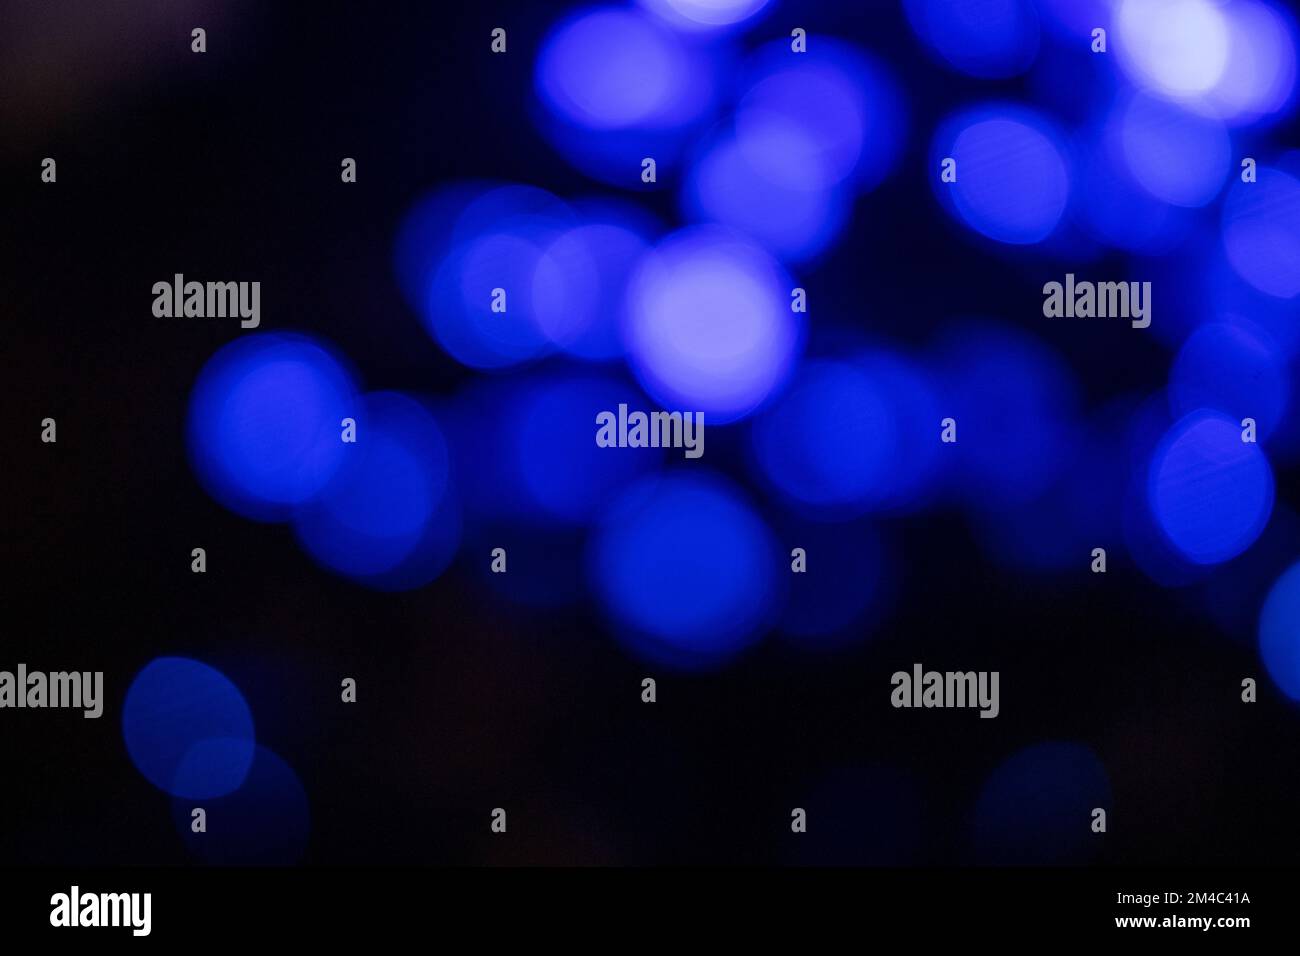 Abstract blurry lights great for backgrounds and designs Stock Photo